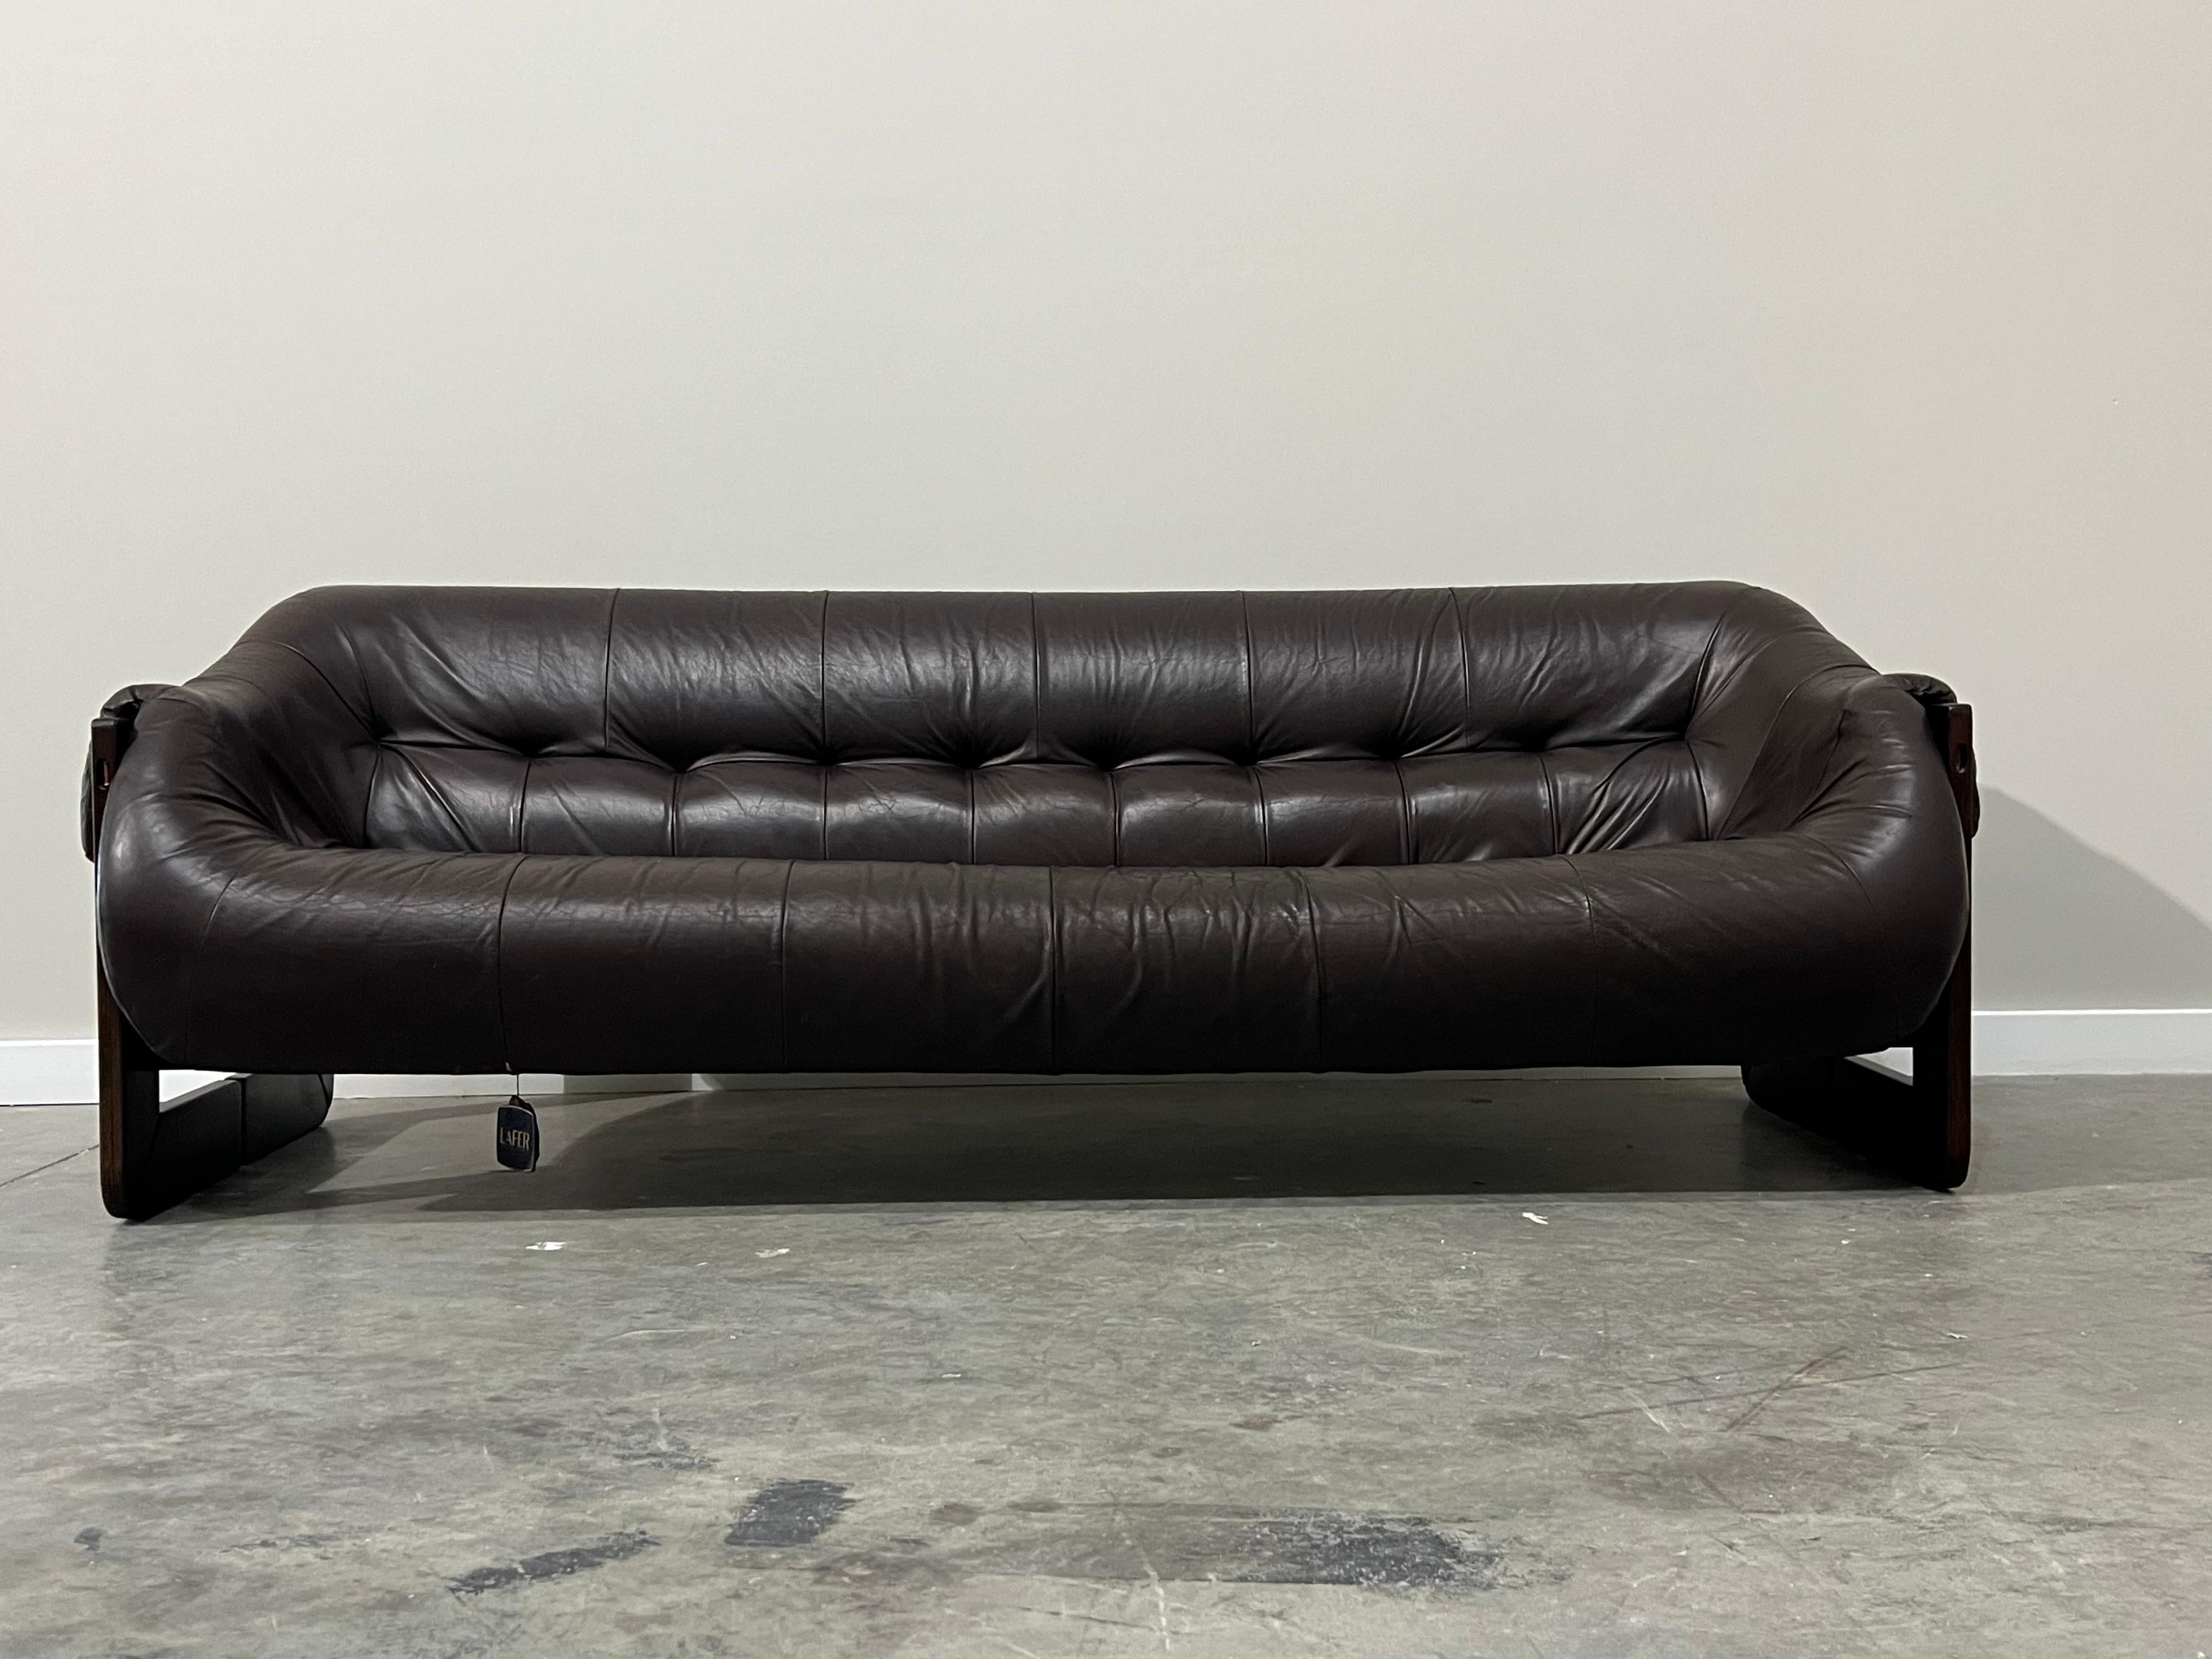 Comfortable and sleek sofa designed by Percival Lafer of Brazil, circa 1970s. Dark chocolate brown leather cushion sits atop leather support straps. The base of the sofa and legs are carved rosewood and the legs are uniquely square shaped. In